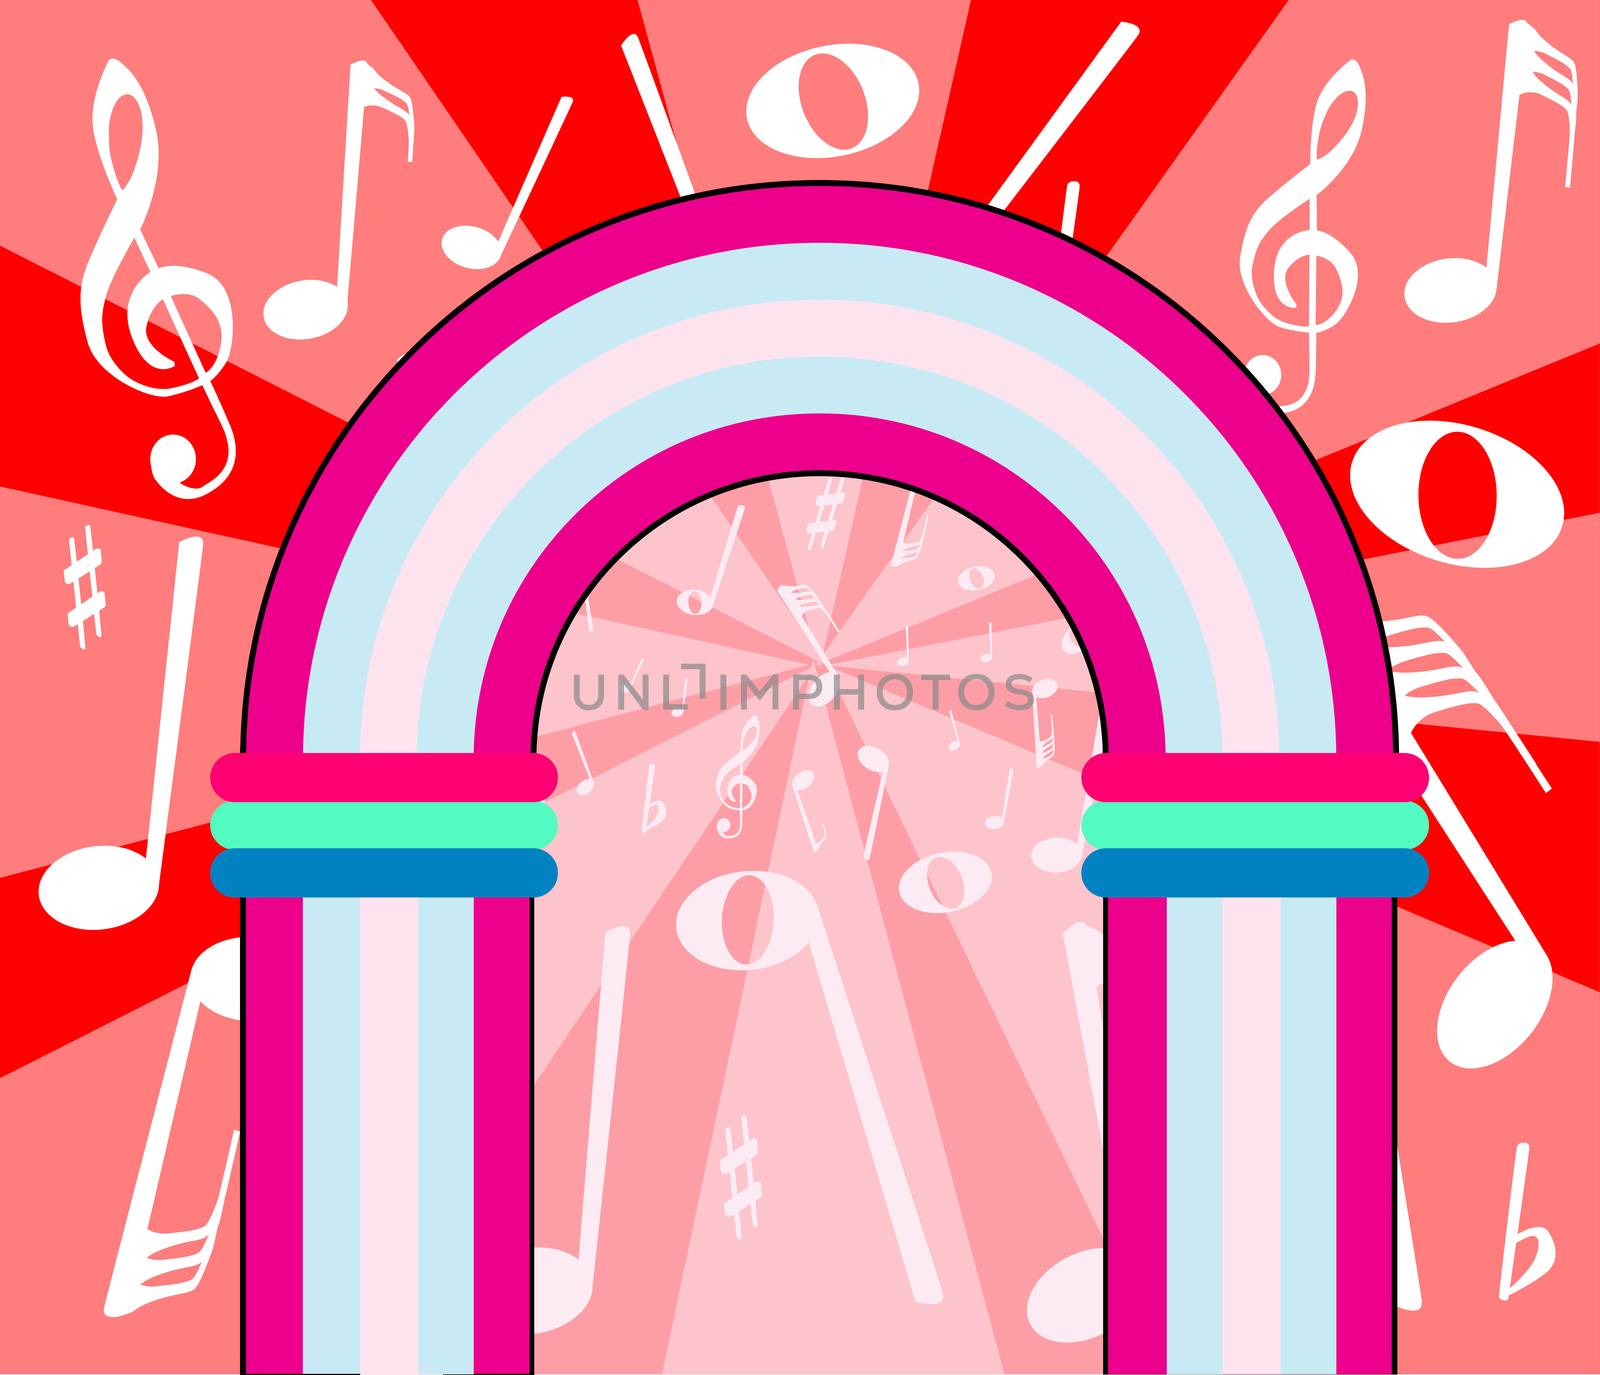 A jukebox depiction with music notation as a background